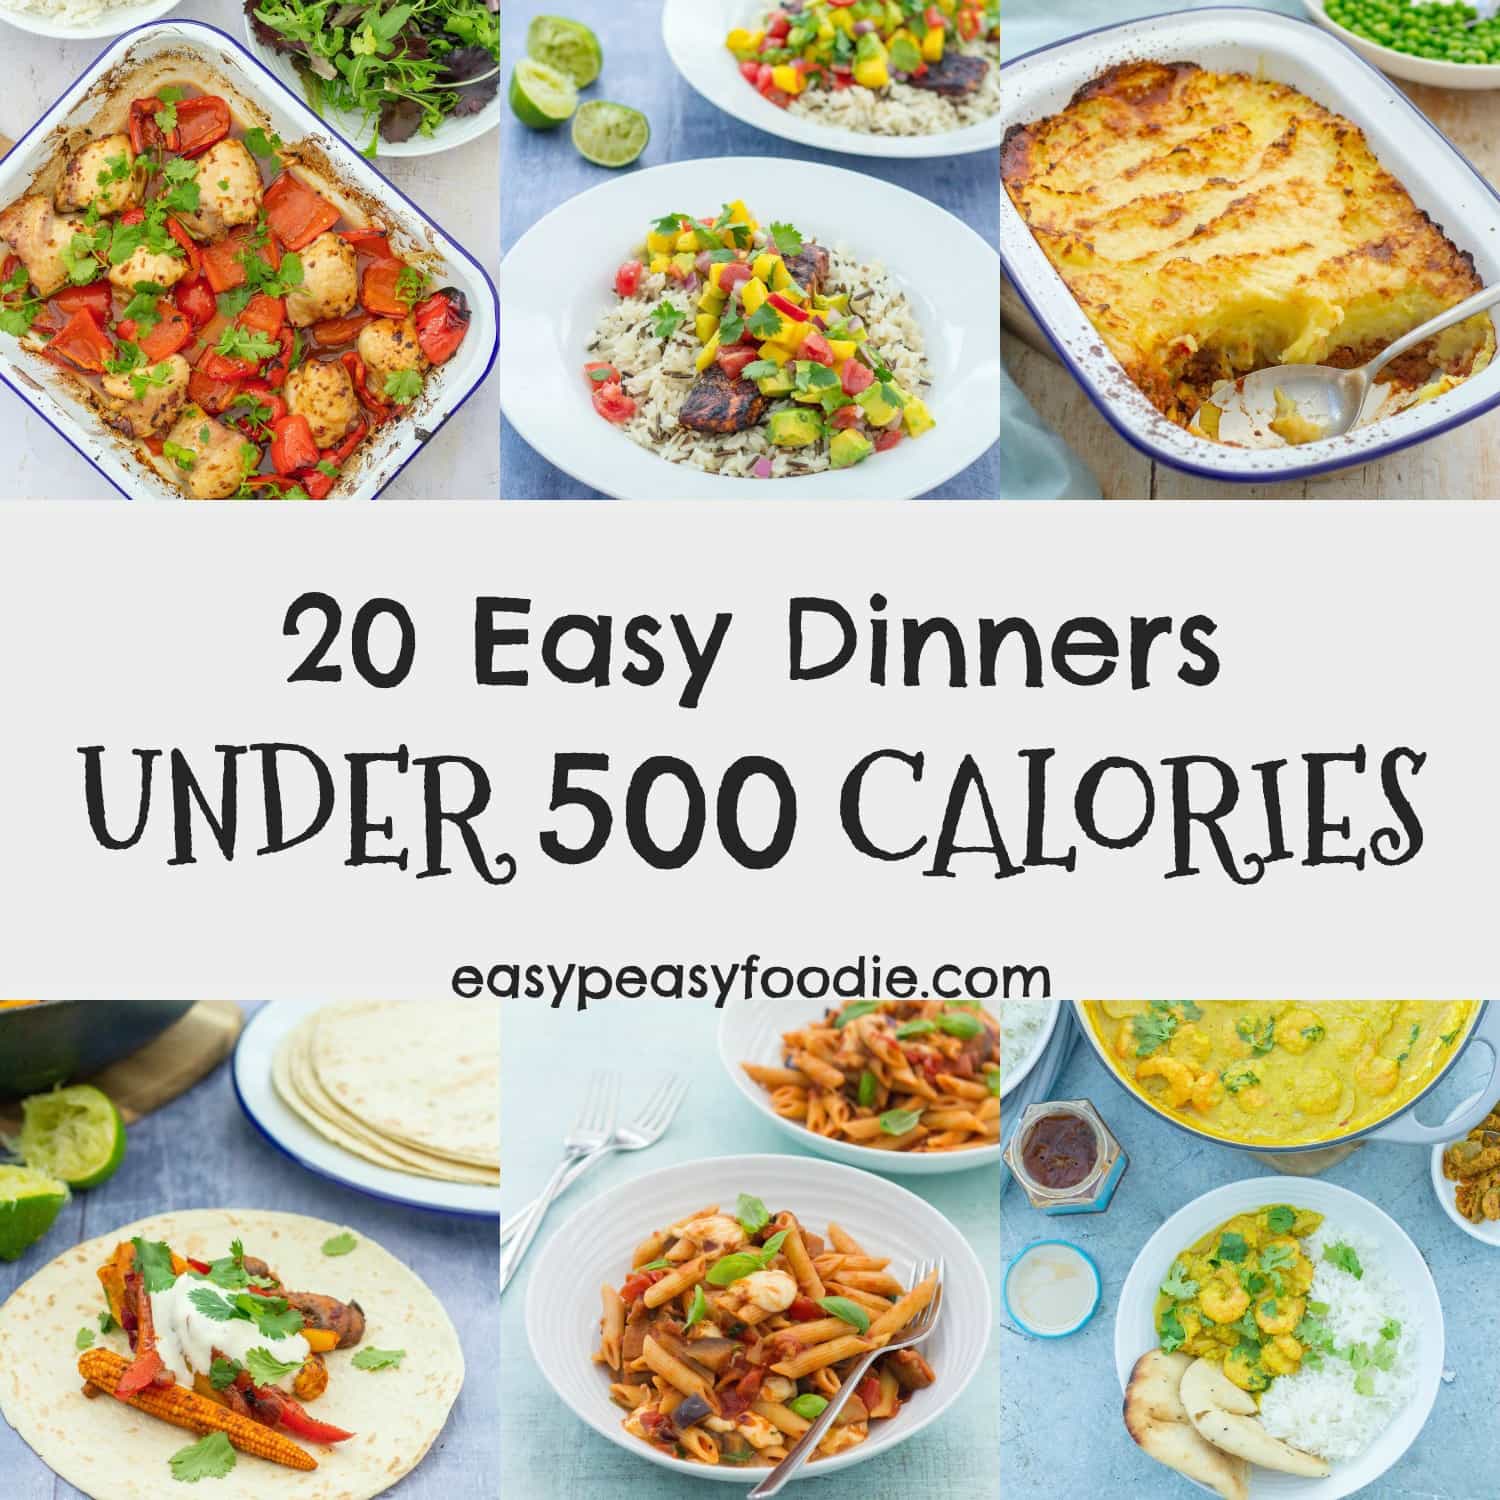 20 Easy Dinners Under 500 Calories